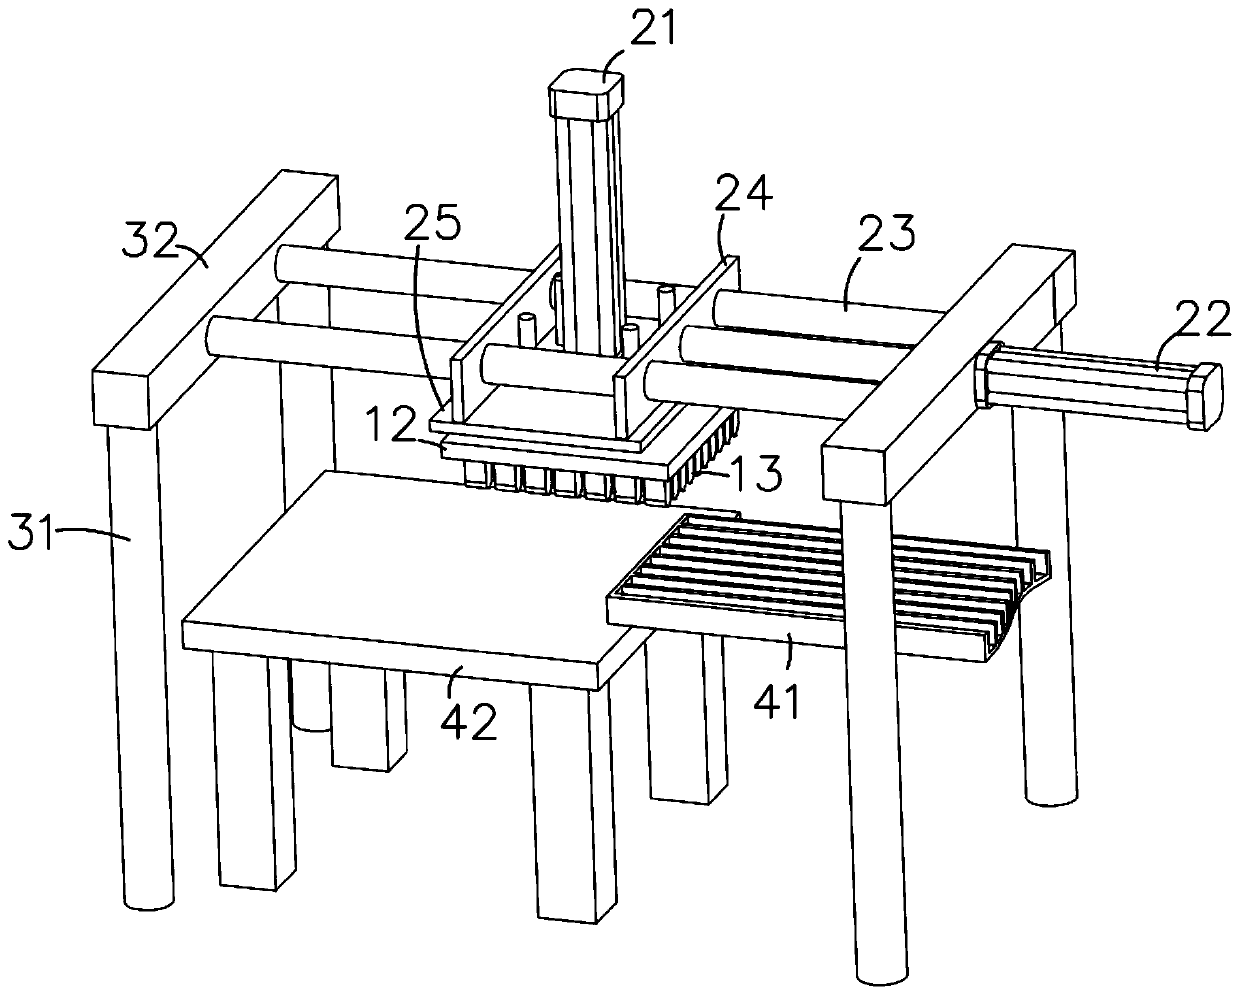 Material taking device for production of lighter assembling line